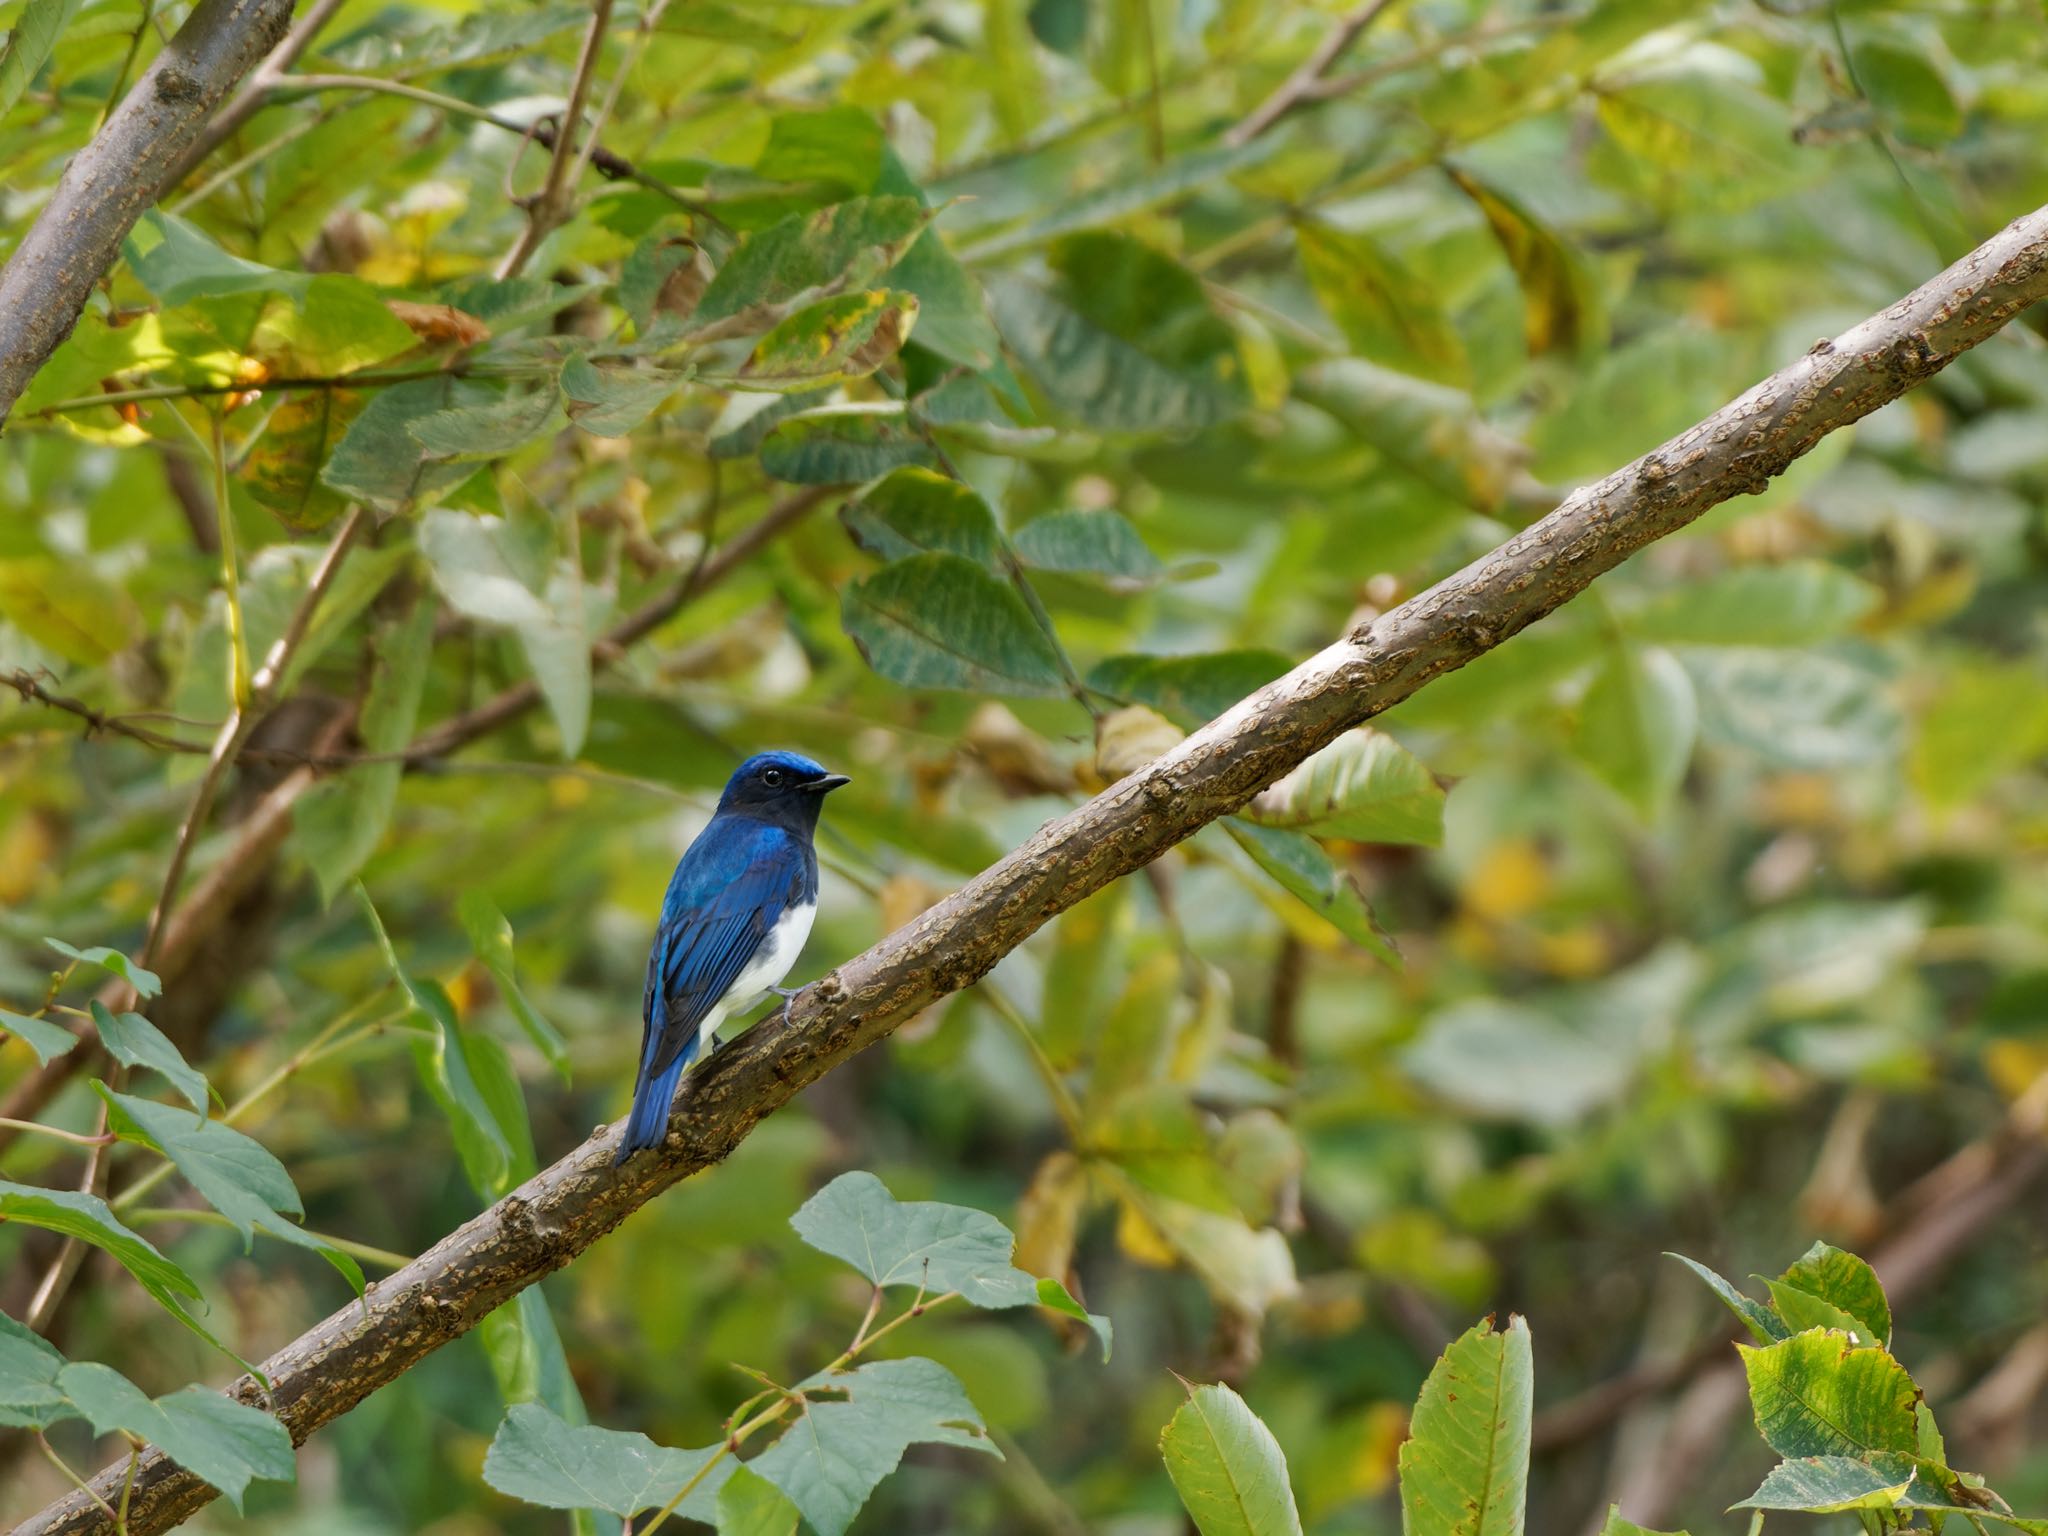 Photo of Blue-and-white Flycatcher at Osaka castle park by speedgame